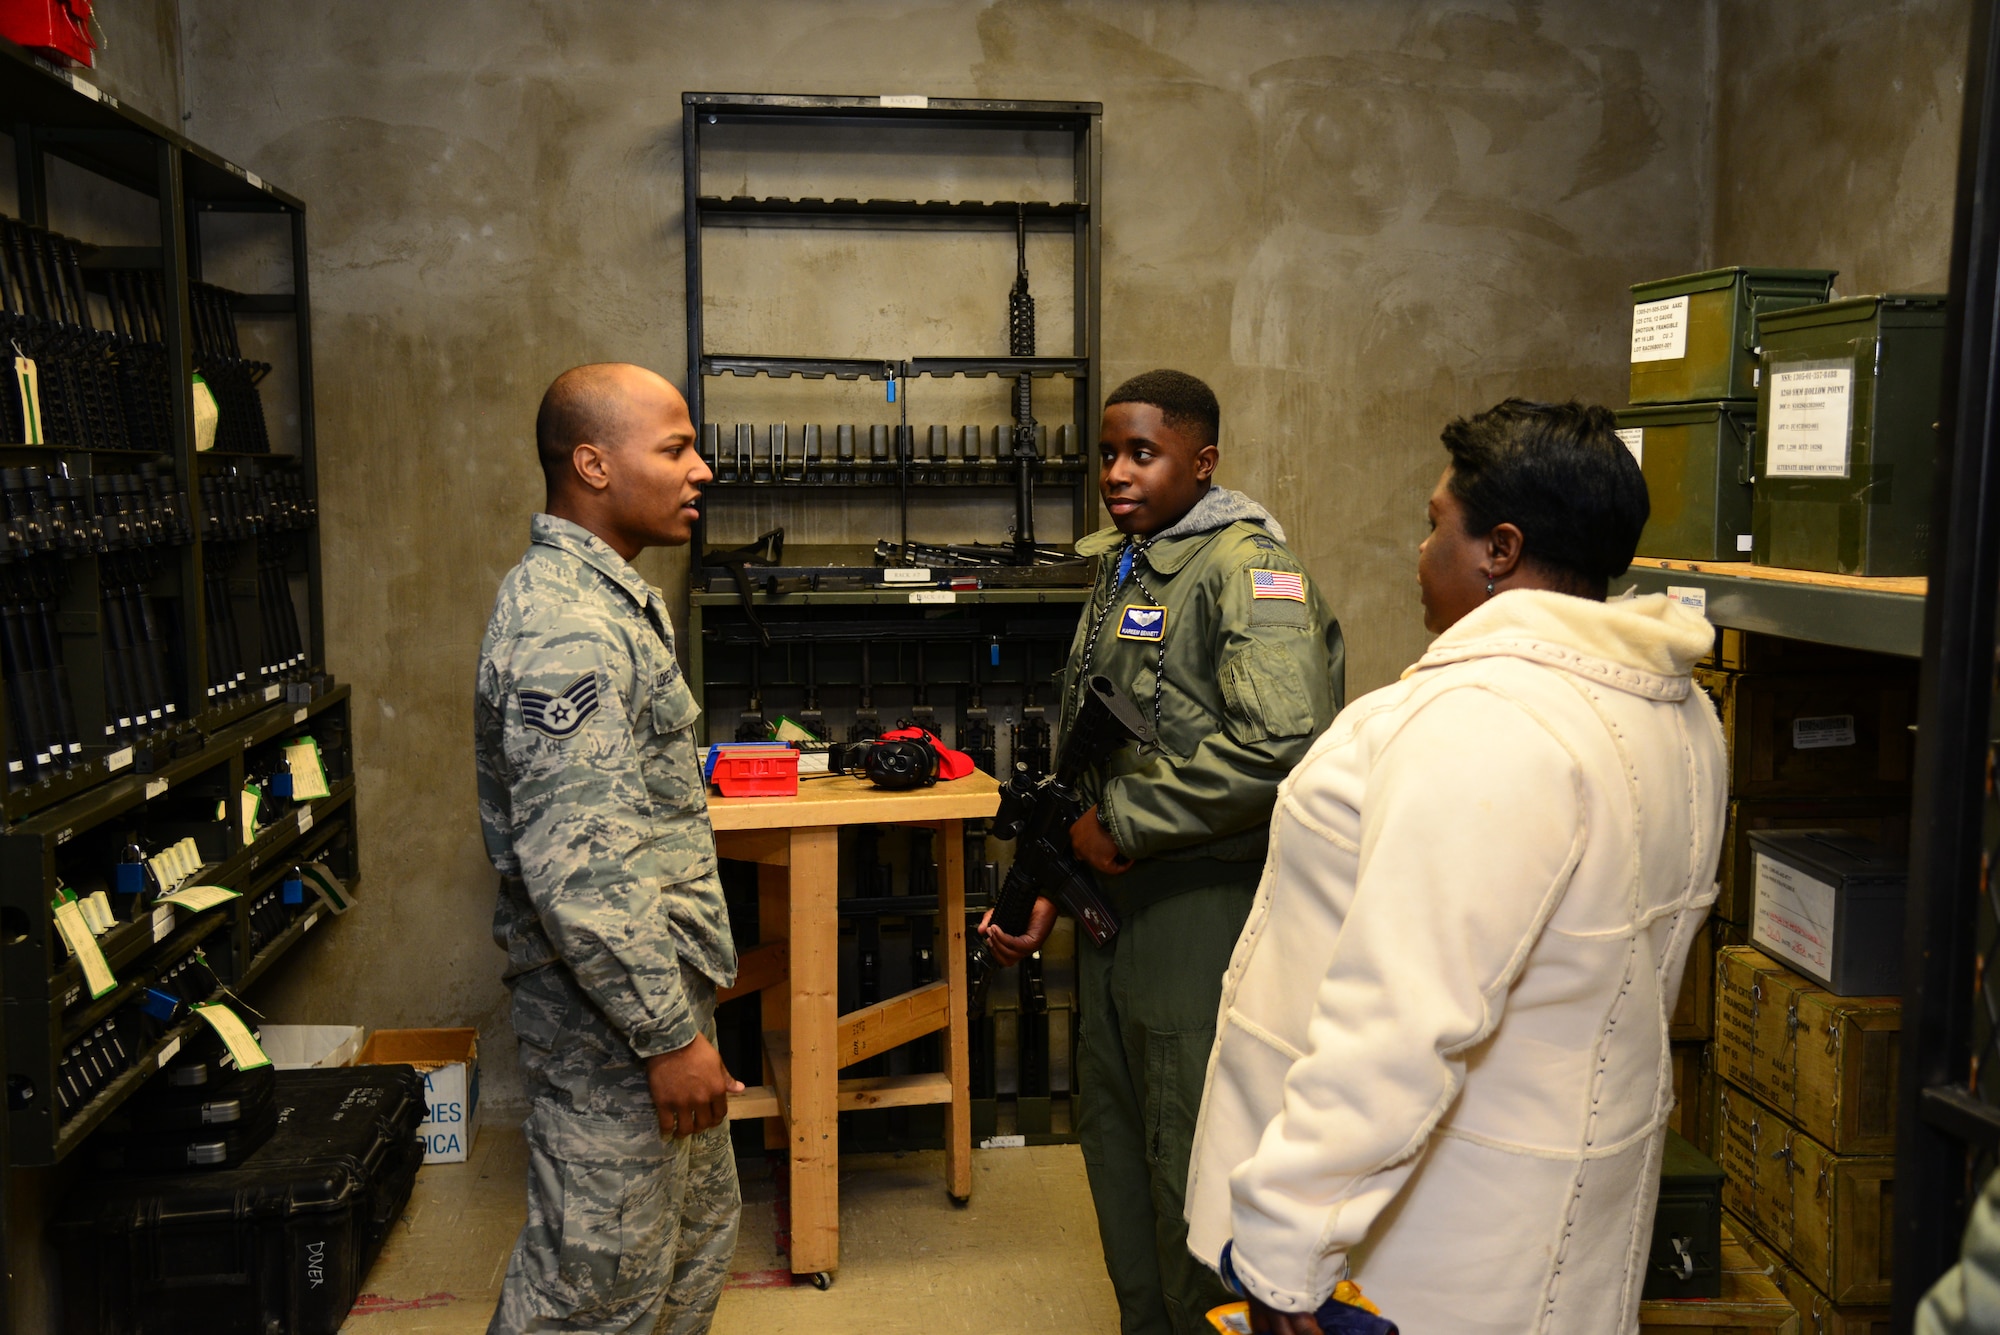 Staff Sgt. Jose Lopez Rodriguez, 436th Security Forces Squadron combat arms instructor, discusses various weapons platforms with Kareem Bennett, 3rd Airlift Squadron honorary pilot for a day, and Aniszia Liverpool, Bennett’s mother, during a private tour of the installation March 16, 2018, at Dover Air Force Base, Del. Bennett, a patient at Alfred I. duPont Hospital for Children in Wilmington, Del., became an honorary pilot and learned more about various Air Force careers, and how they contribute to the mobility mission. (U.S. Air Force photo by Staff Sgt. Aaron J. Jenne)